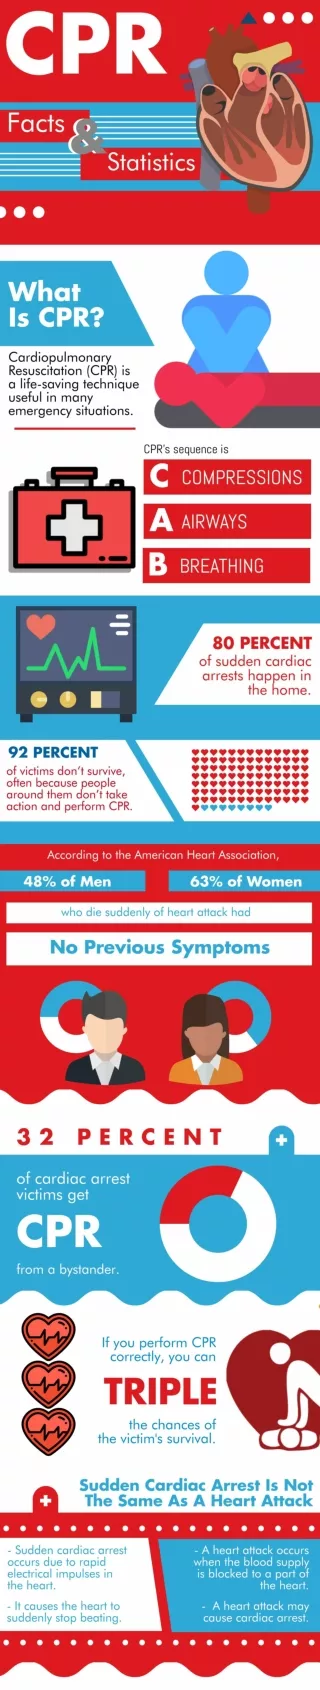 CPR Facts & Statistics